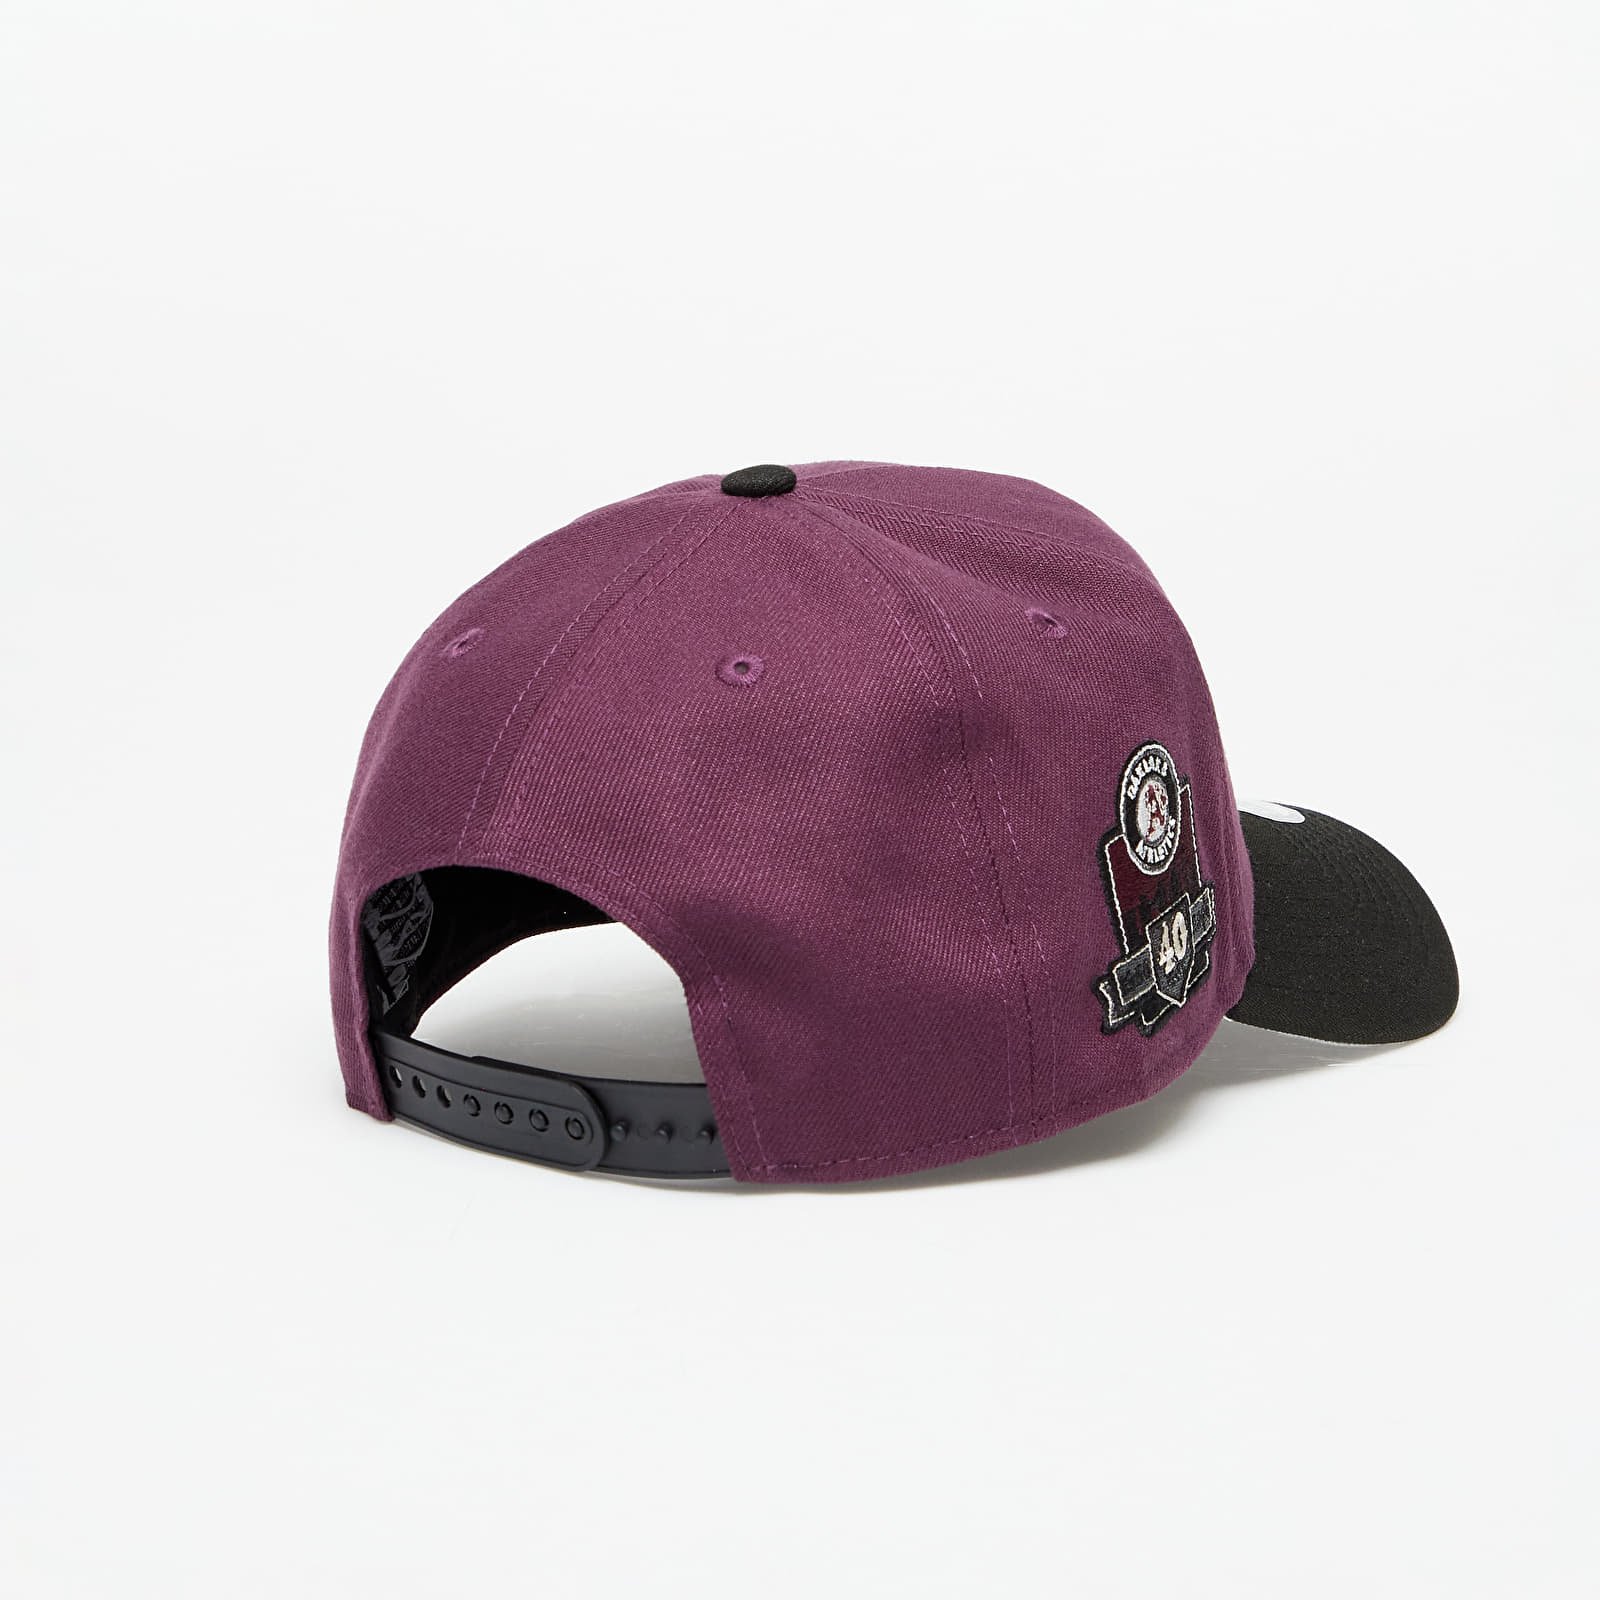 Los Angeles Dodgers 9FORTY Two-Tone A-Frame Adjustable Cap Dark Purple